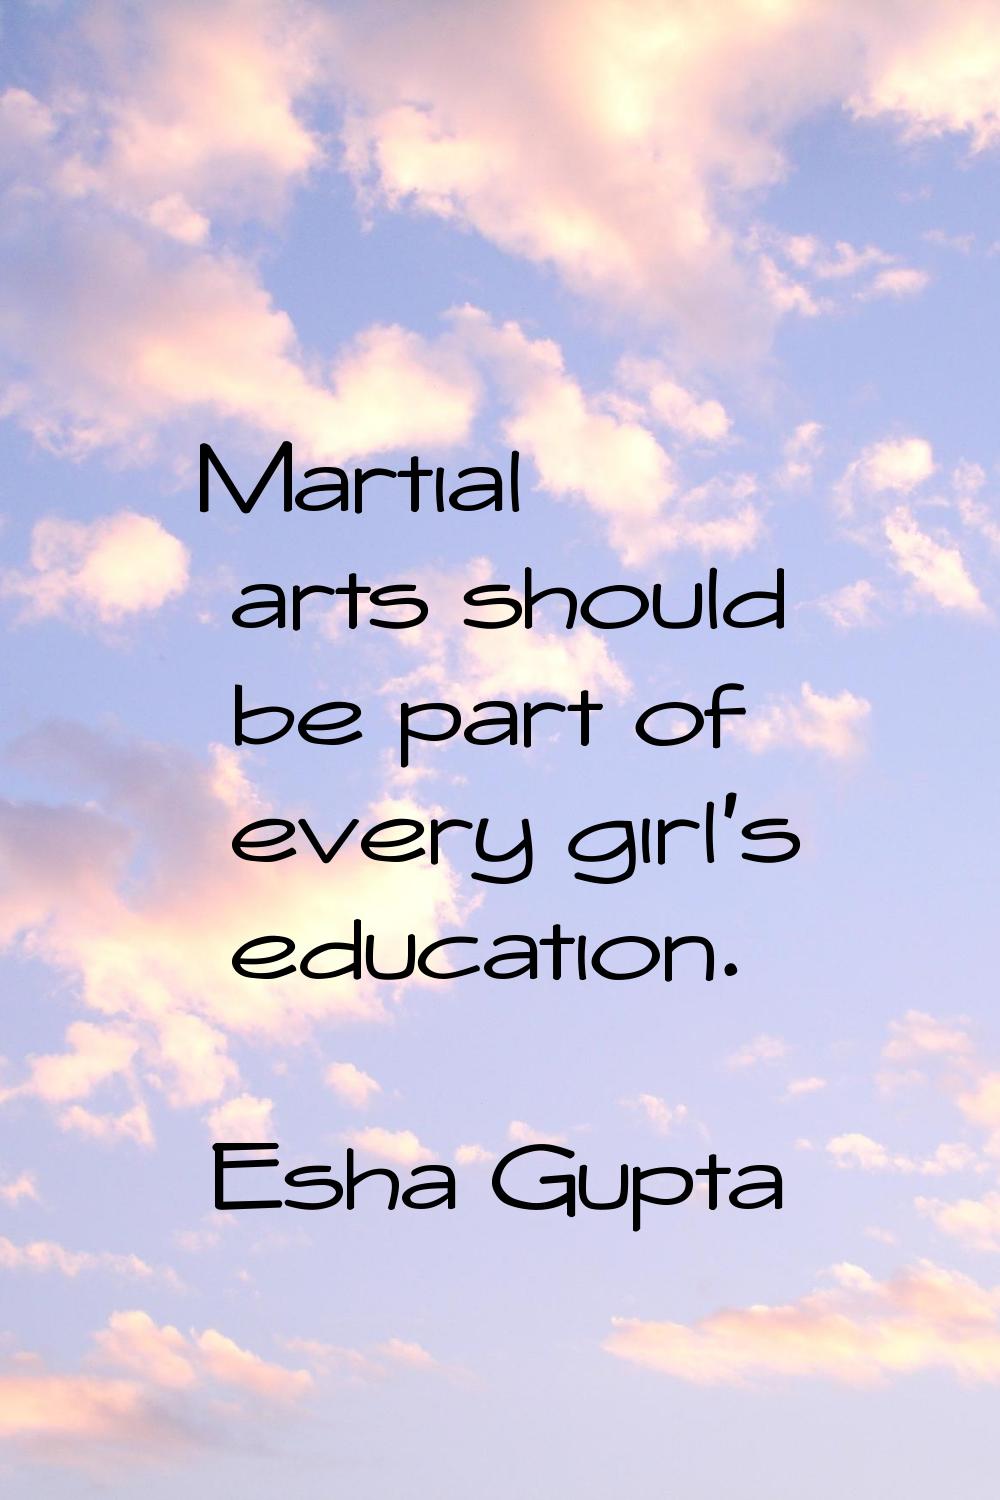 Martial arts should be part of every girl's education.